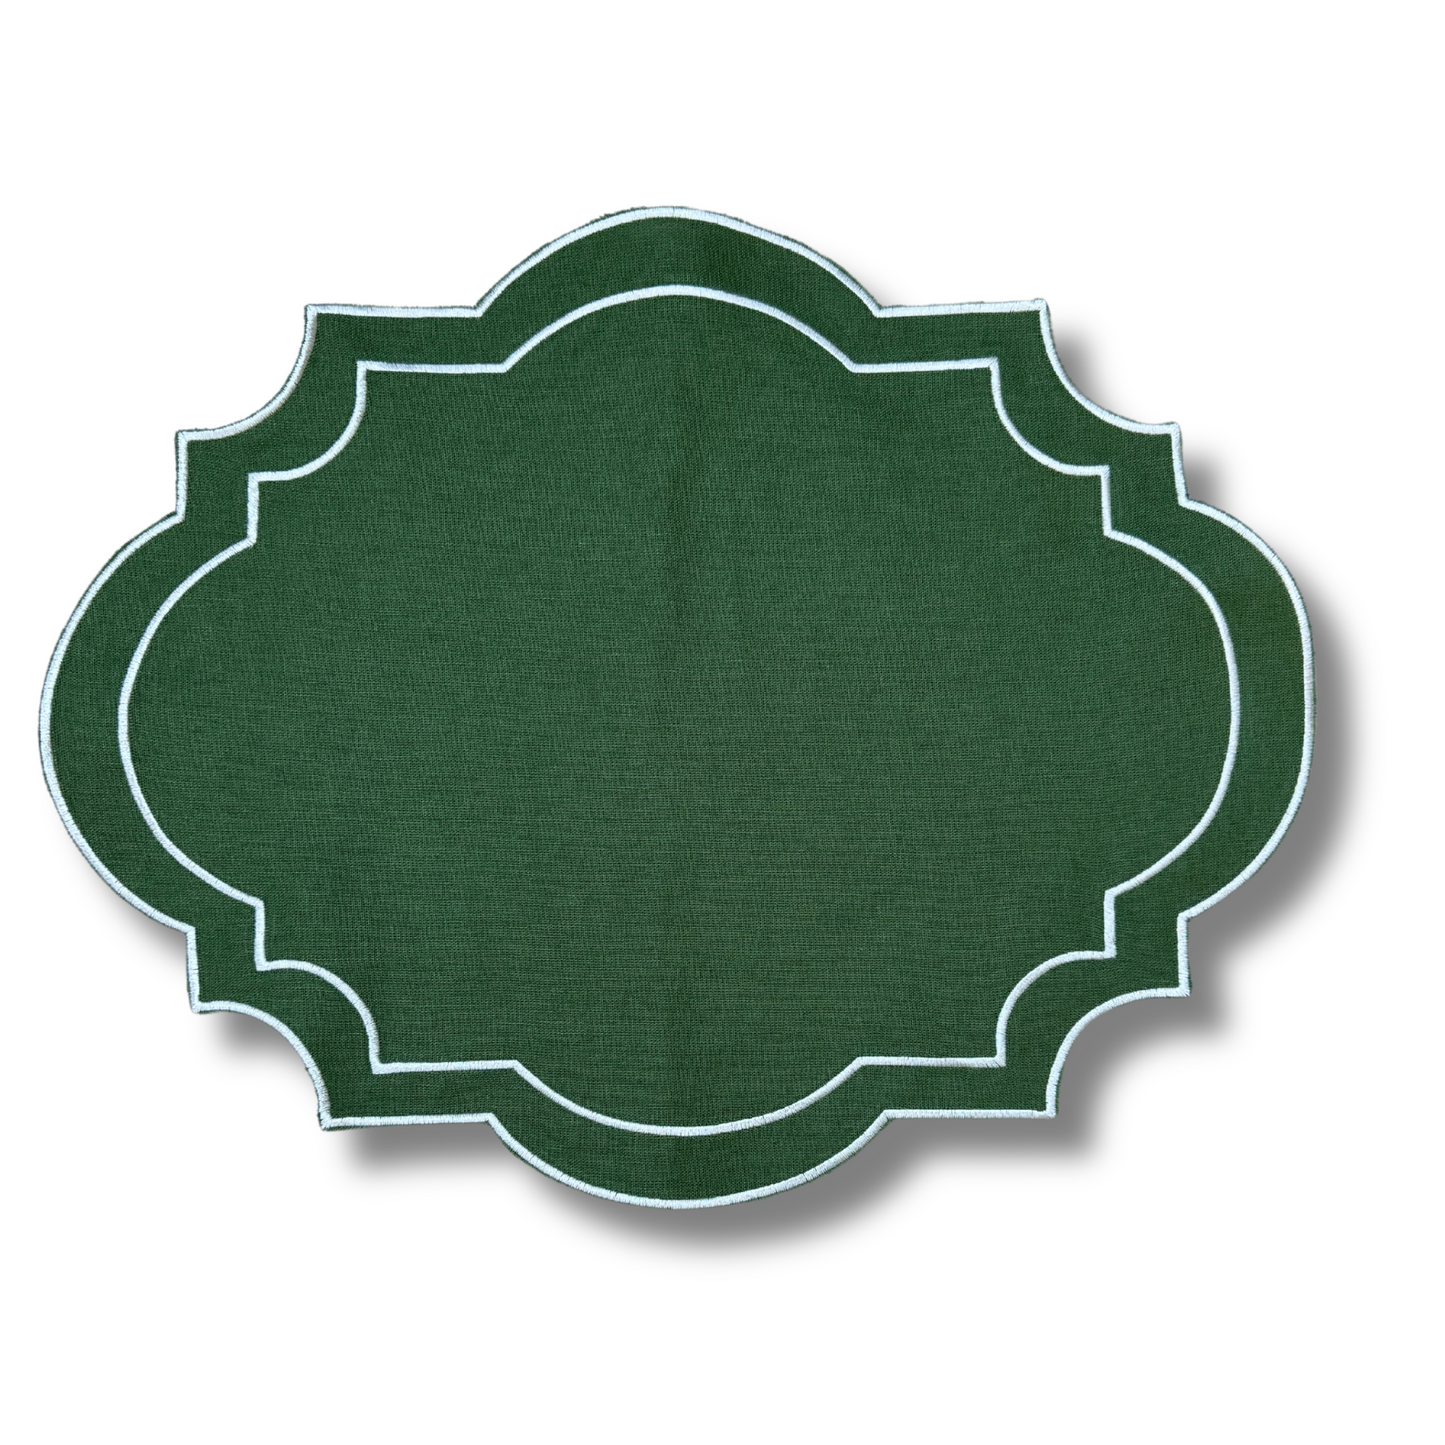 The Cassandra Placemat Green with Cream Embroidery